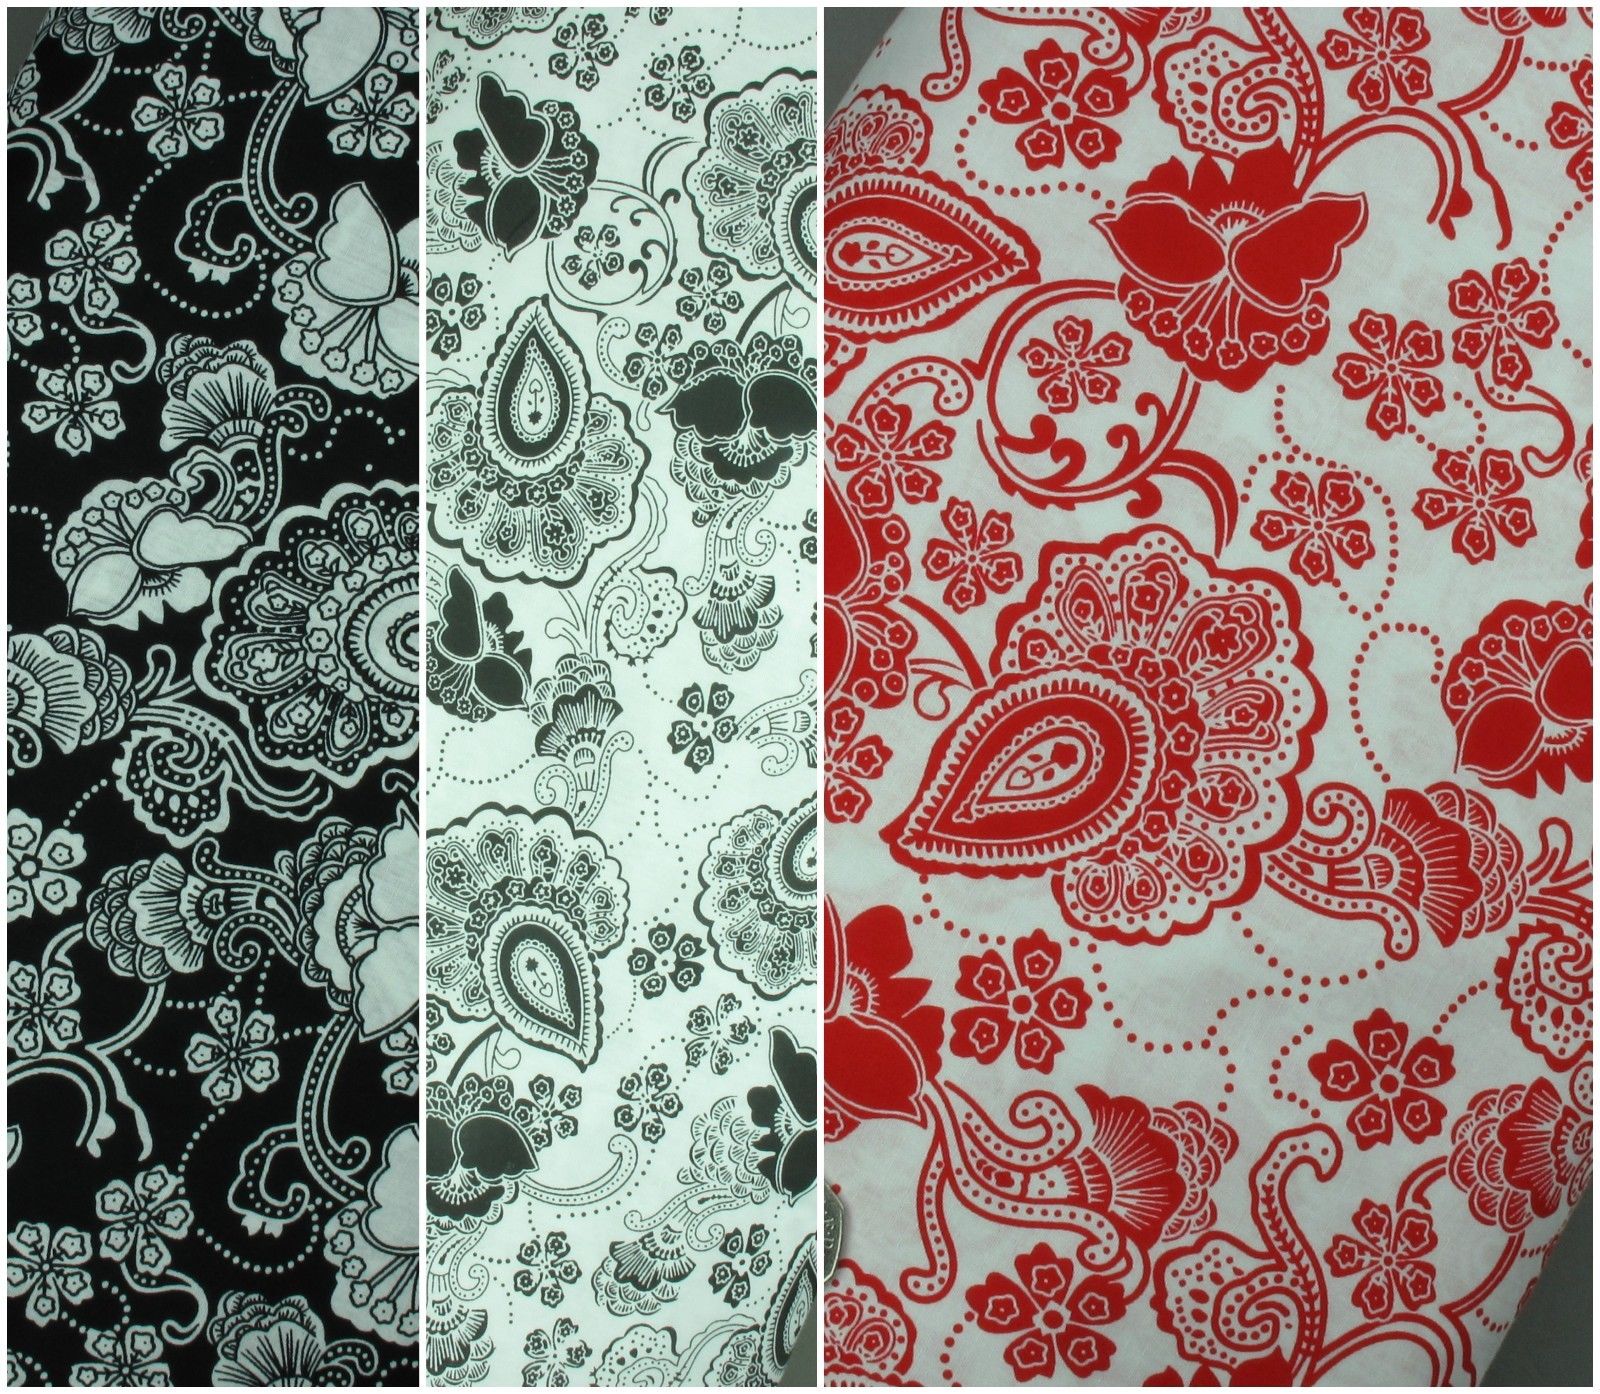 100% Cotton Fabric White/Black/Red Large Exotic Floral -  HIGH QUALITY